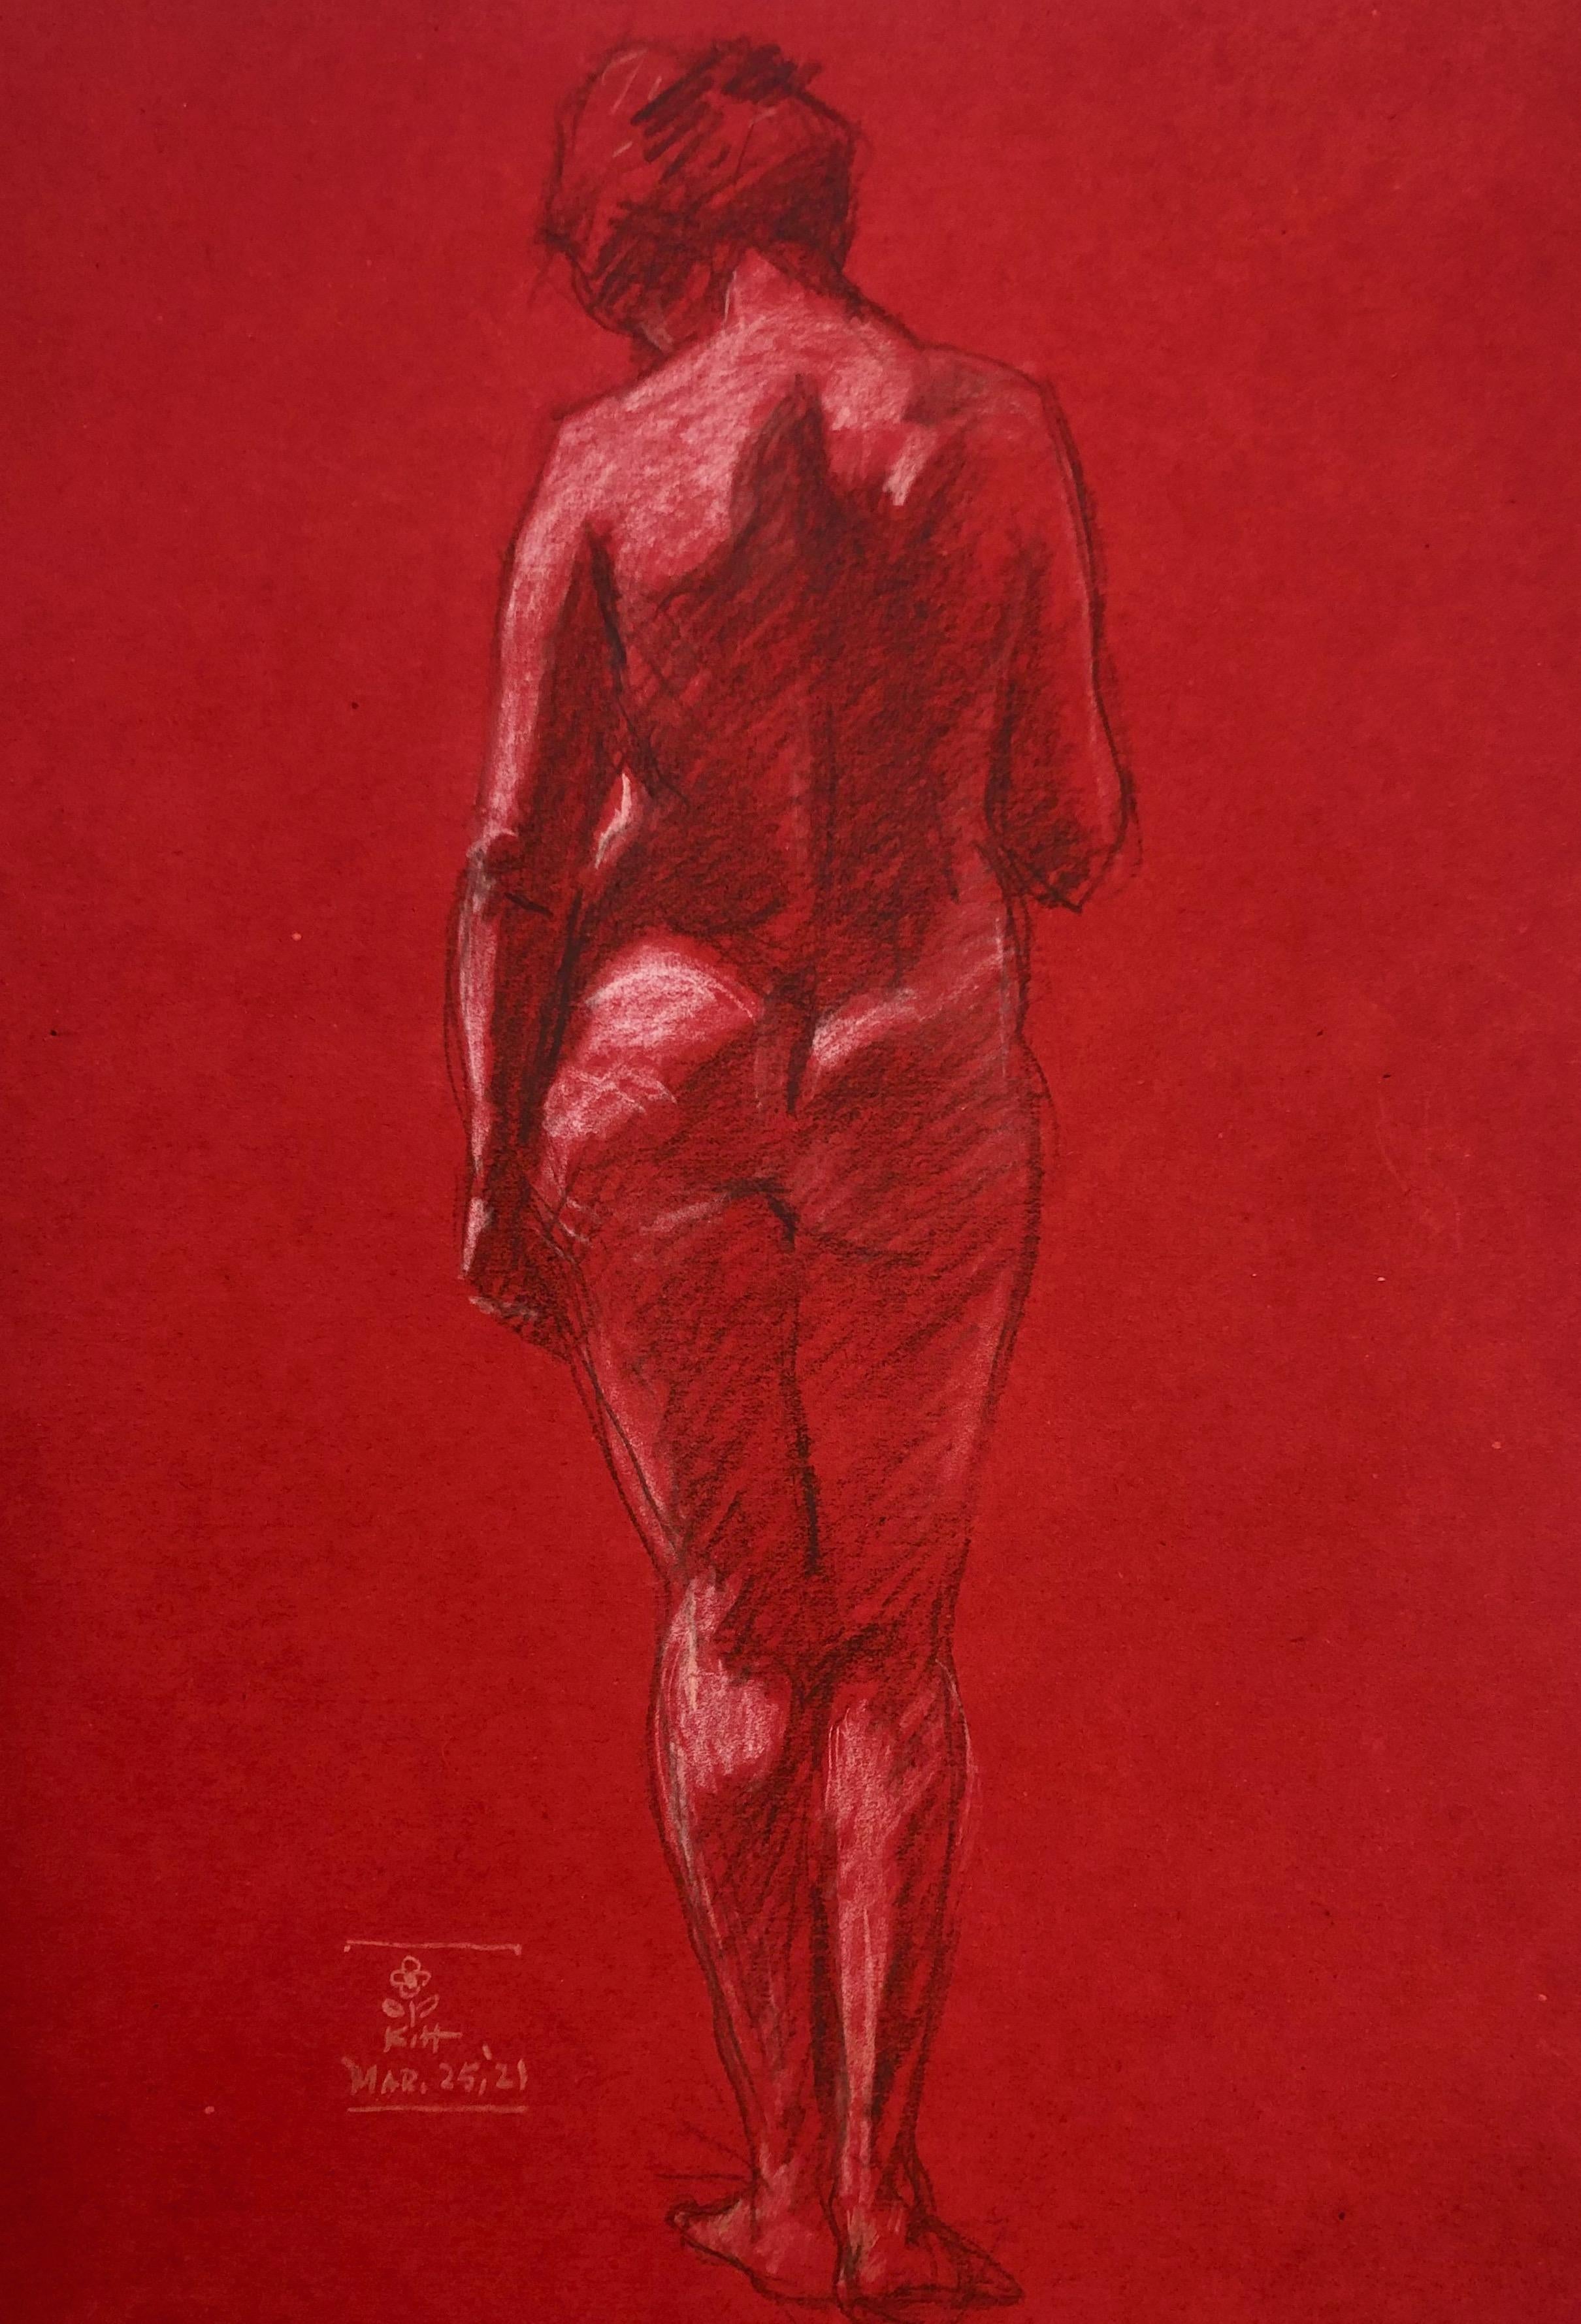  Nude Drawings On Red Paper - American Modern Art by George Kenneth Hartwell 